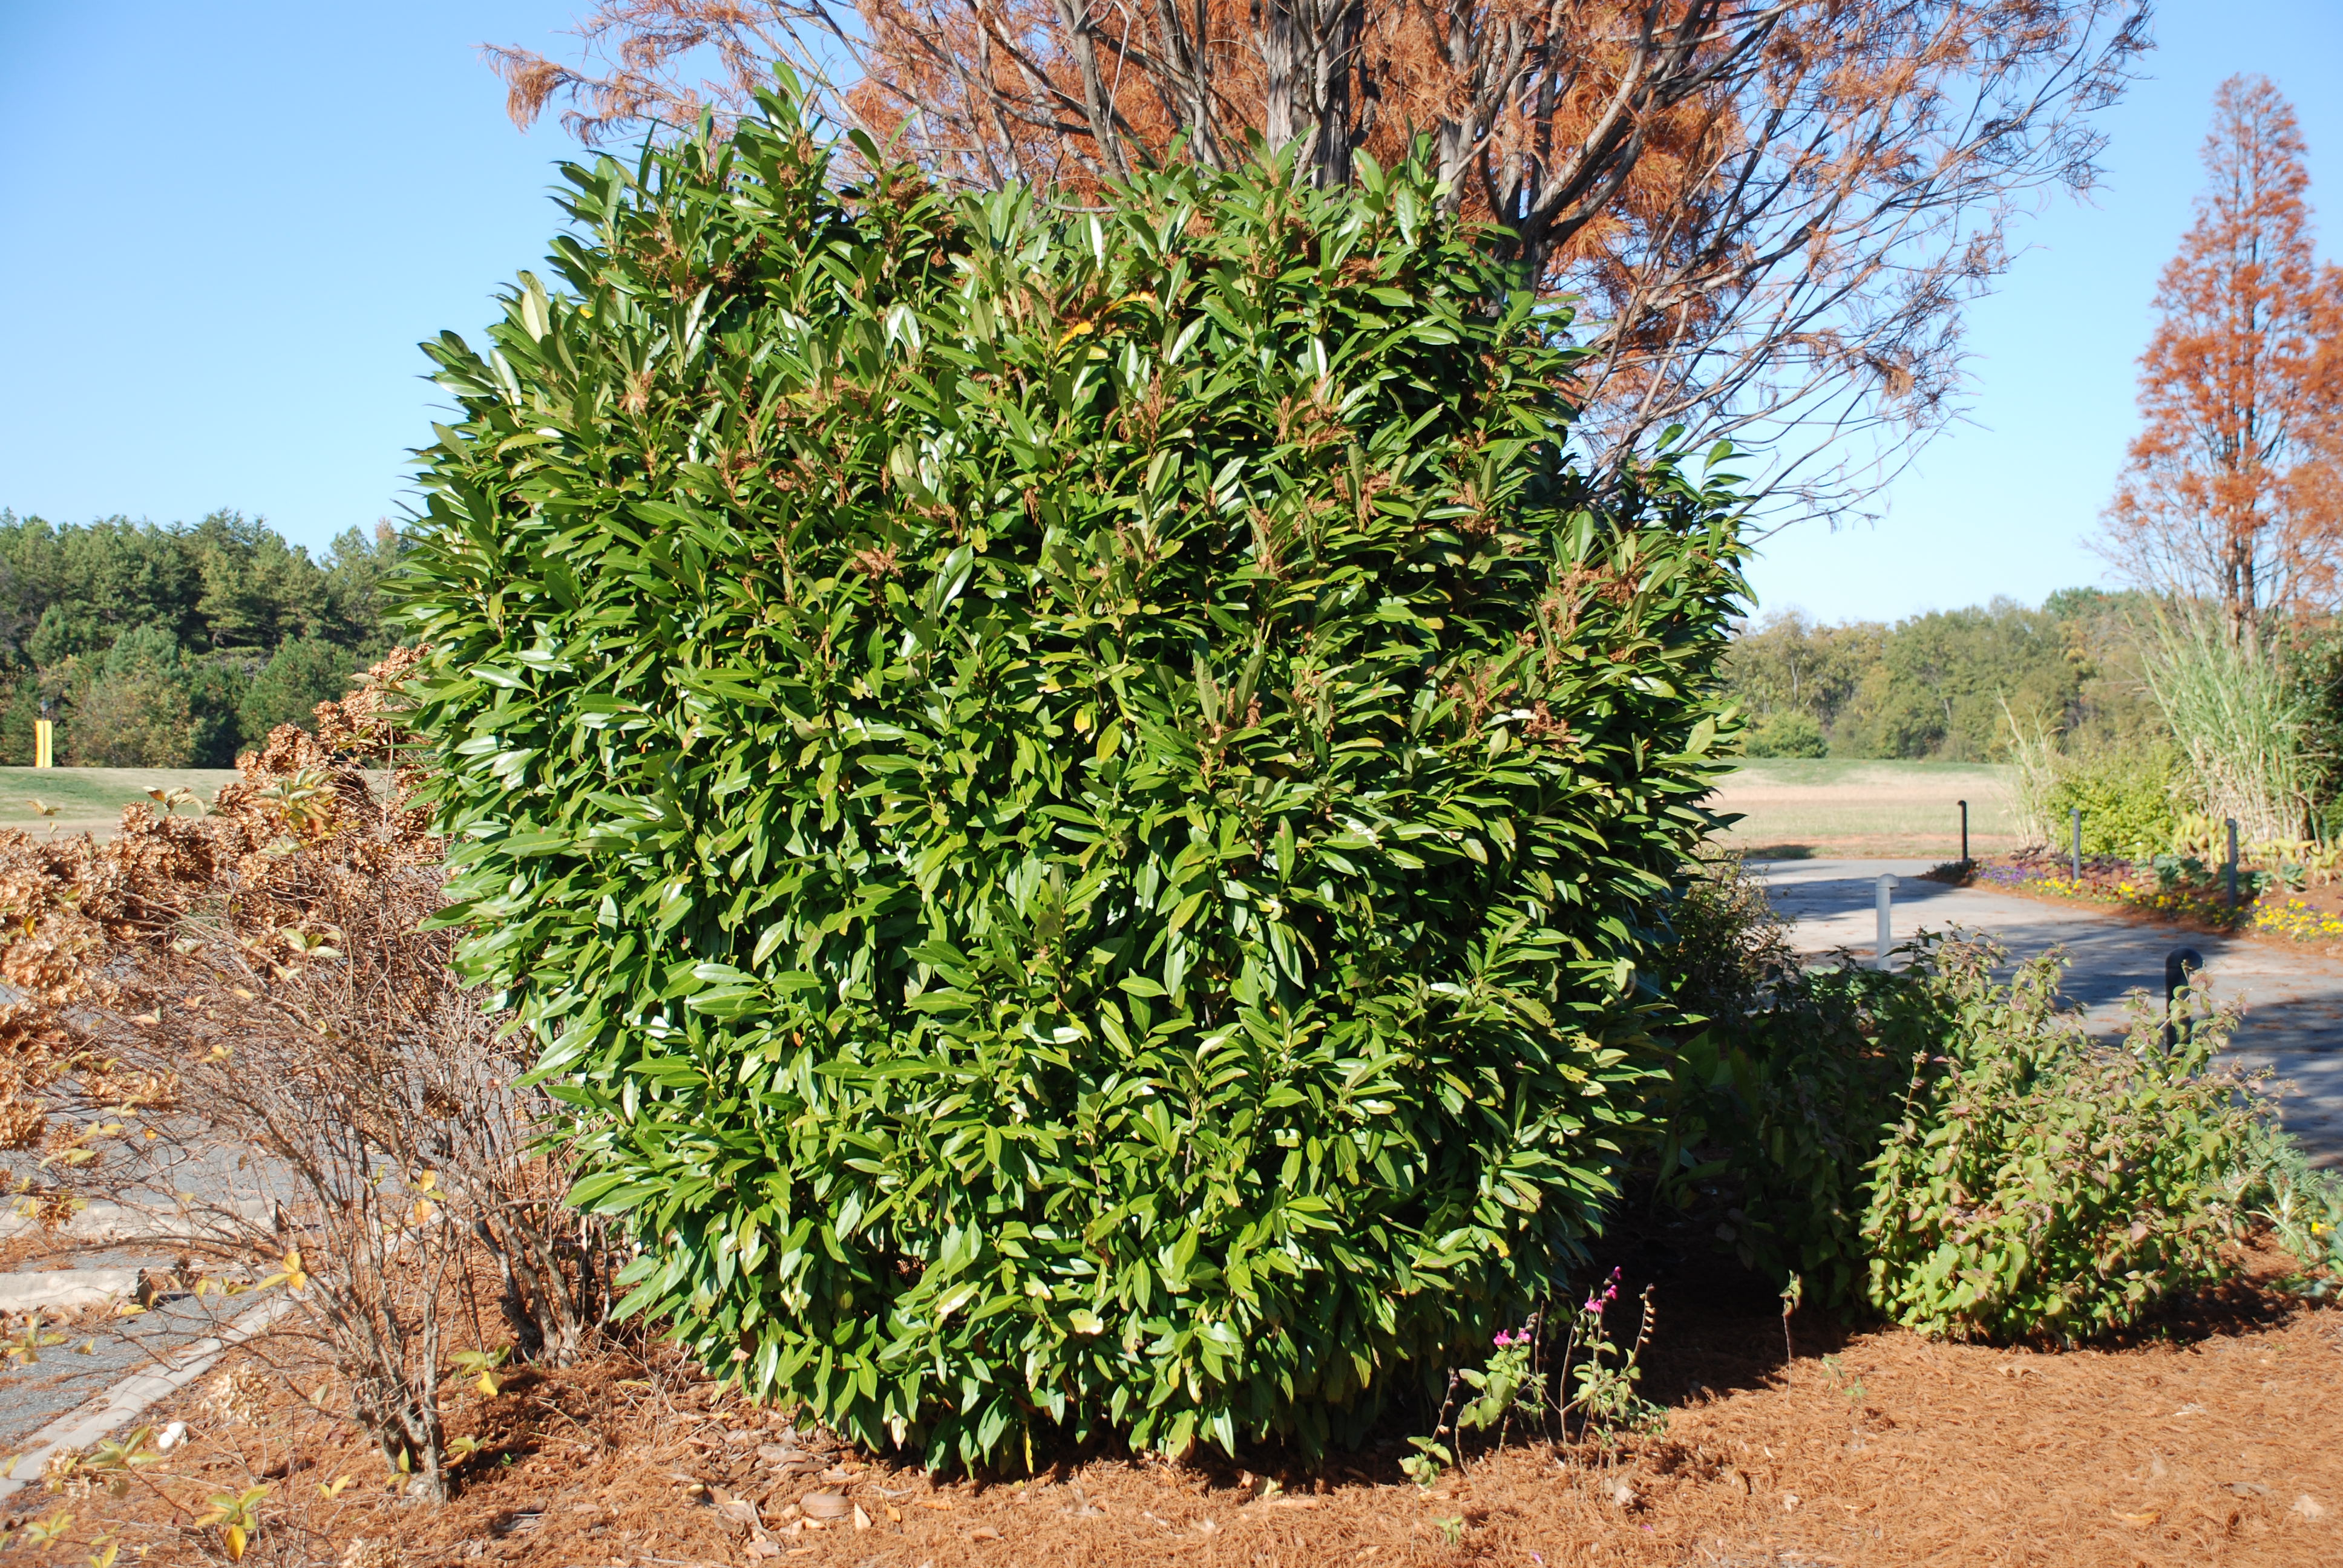 Will The Best Cherry Laurel Please Come Forward? | What Grows There